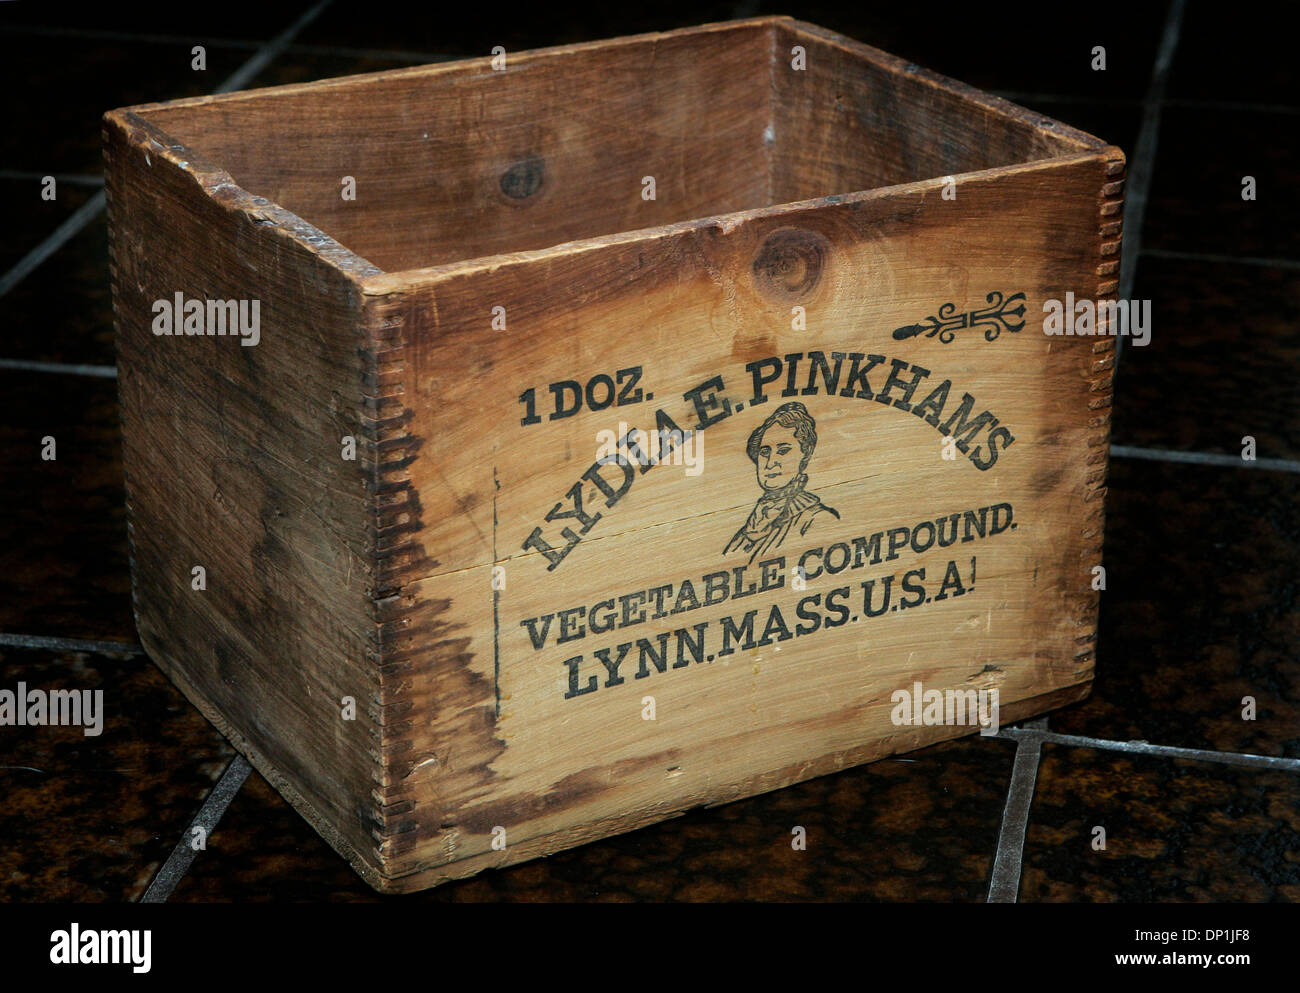 May 02, 2006; Poway, CA, USA; CECIL MUNSEY has an entire bathroom devoted  to Lydia Pinkham, a 19th century medicine maker. The wooden box dates back  to the 1890's which housed Lydia